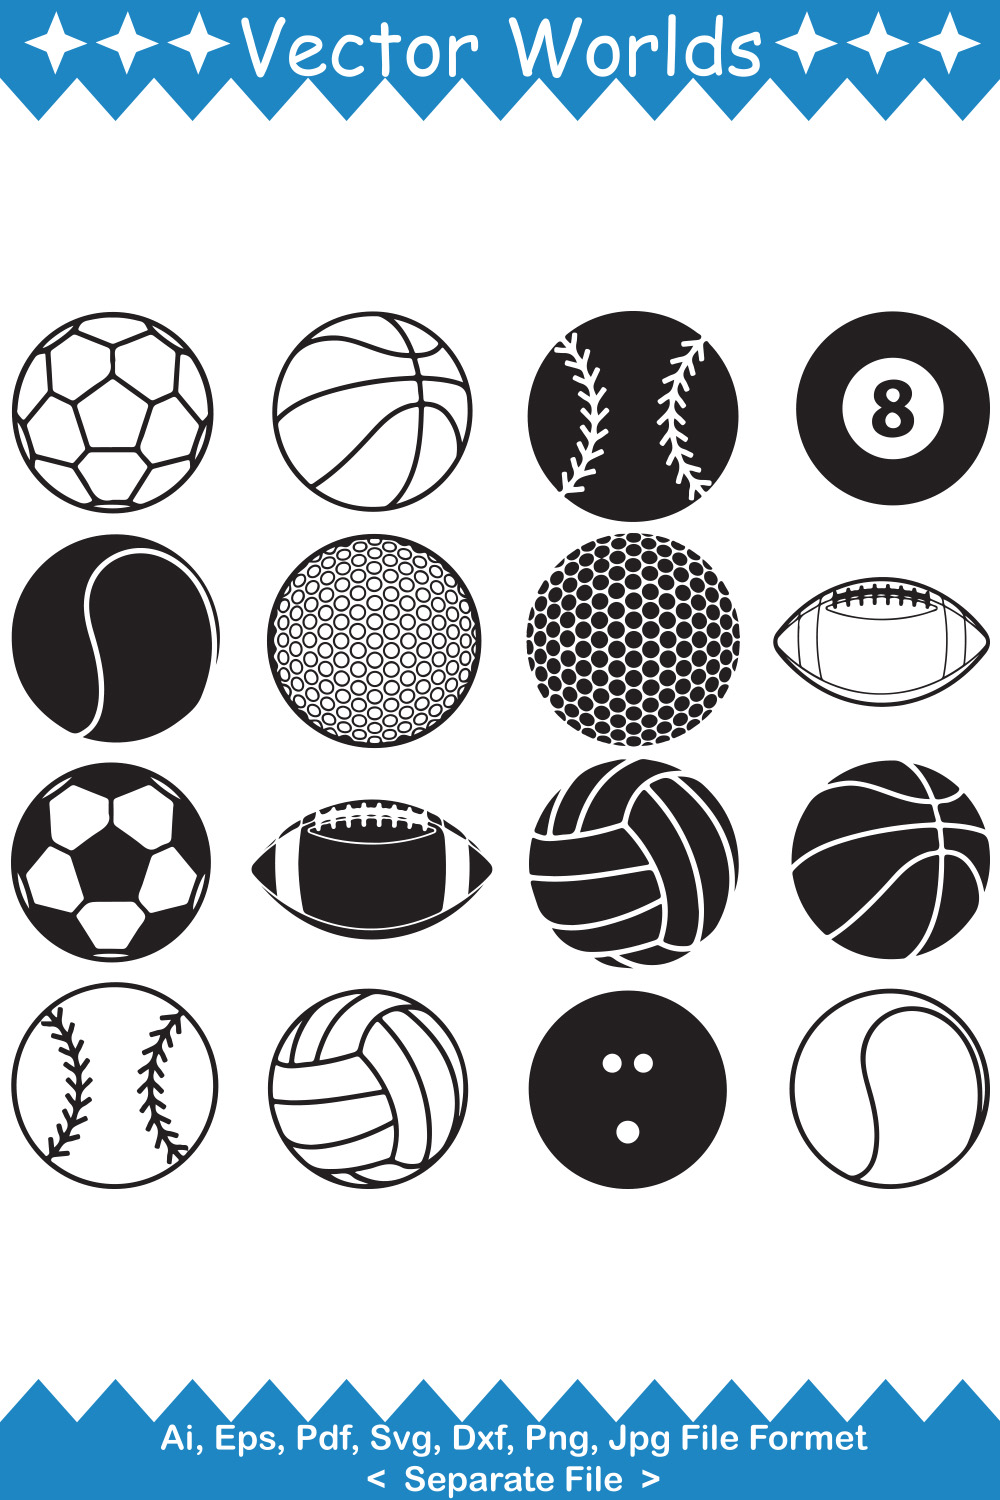 Collection of elegant vector images of balls.